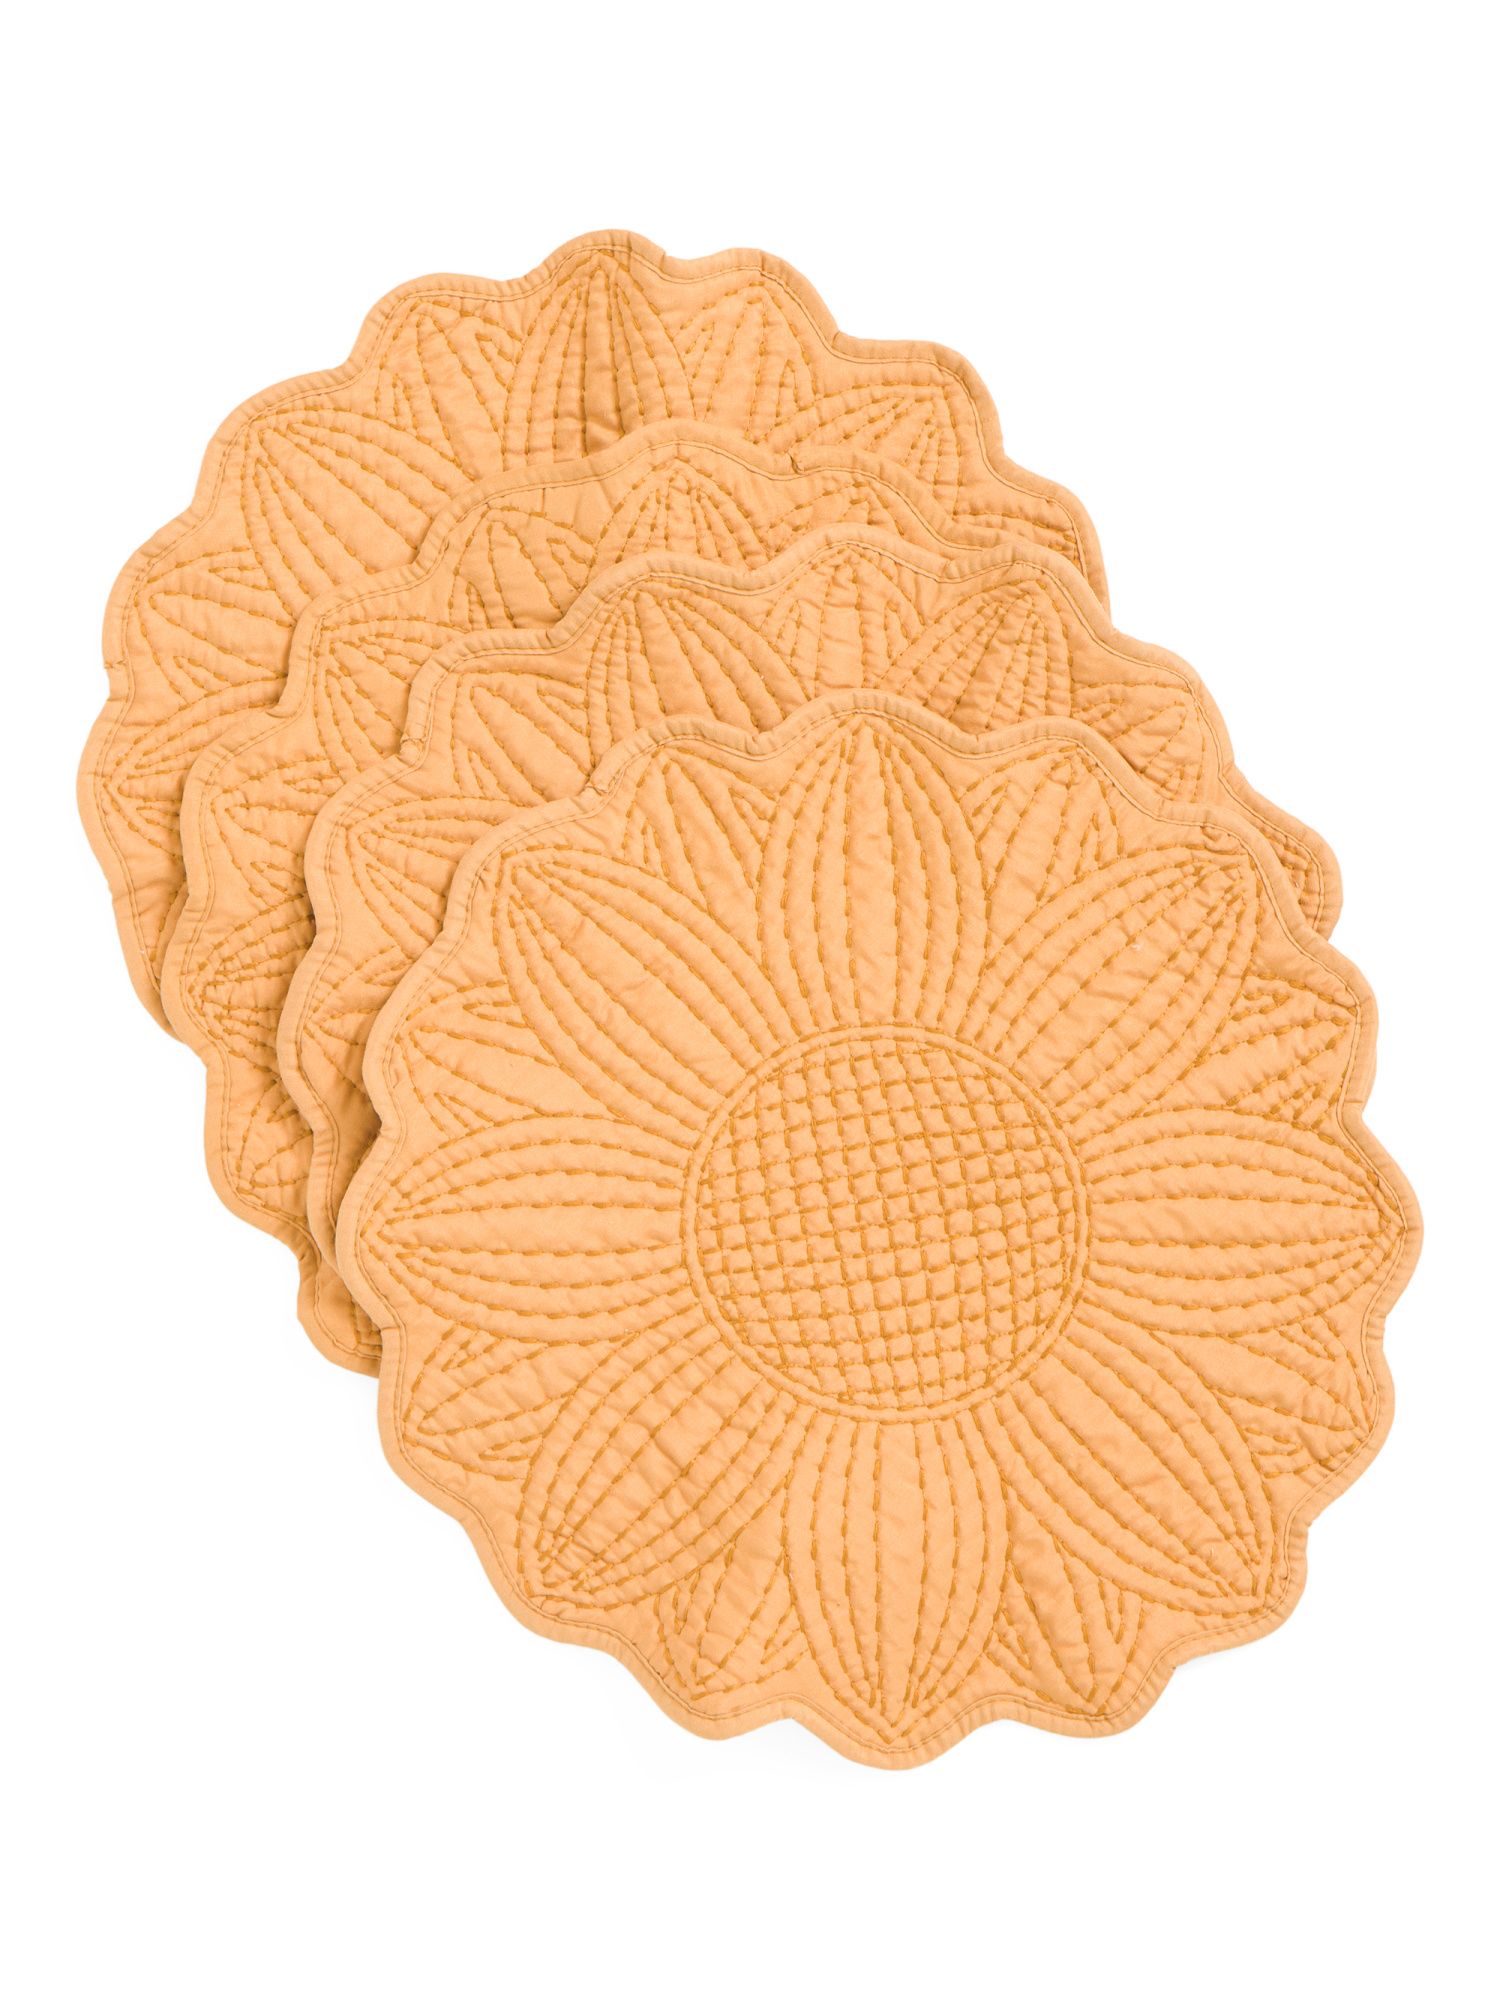 4pk Quilted Sunflower Shaped Placemats | TJ Maxx